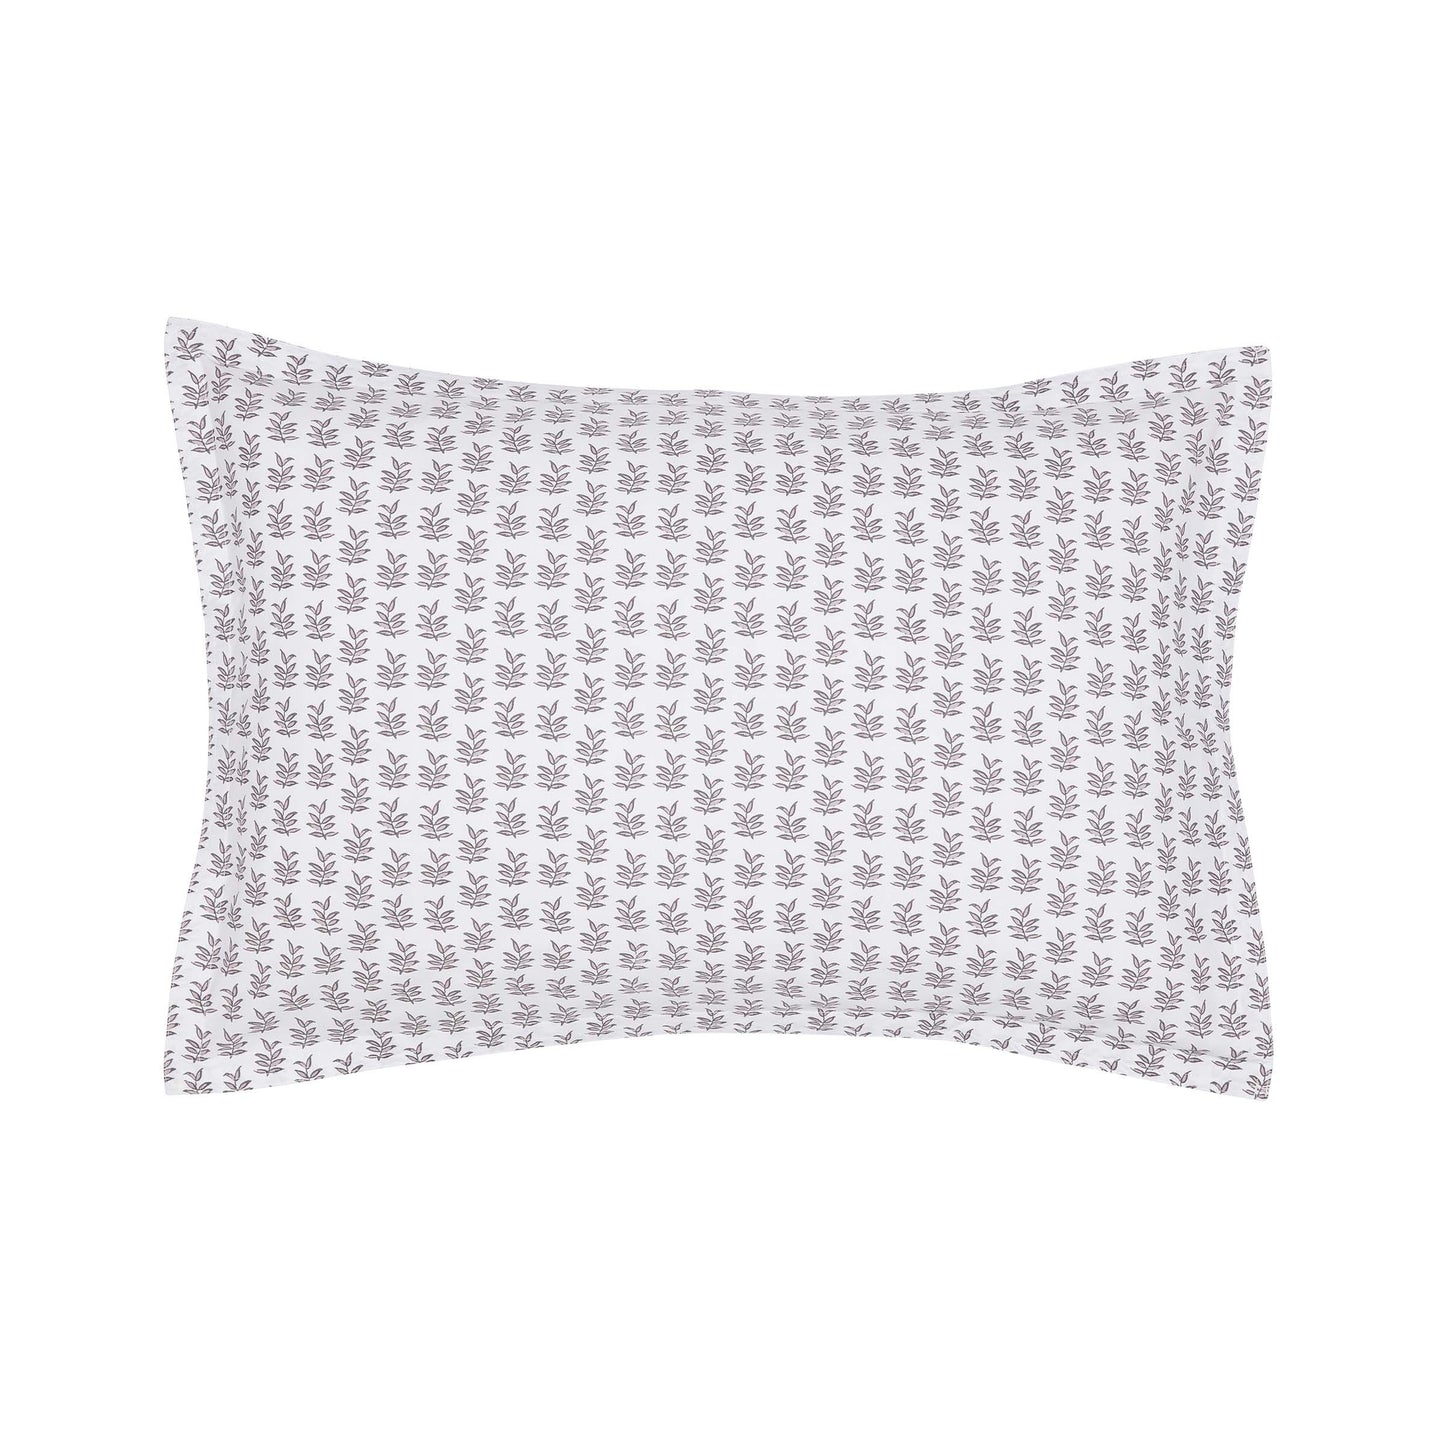 Rae Heather Patterned Pillowcases 